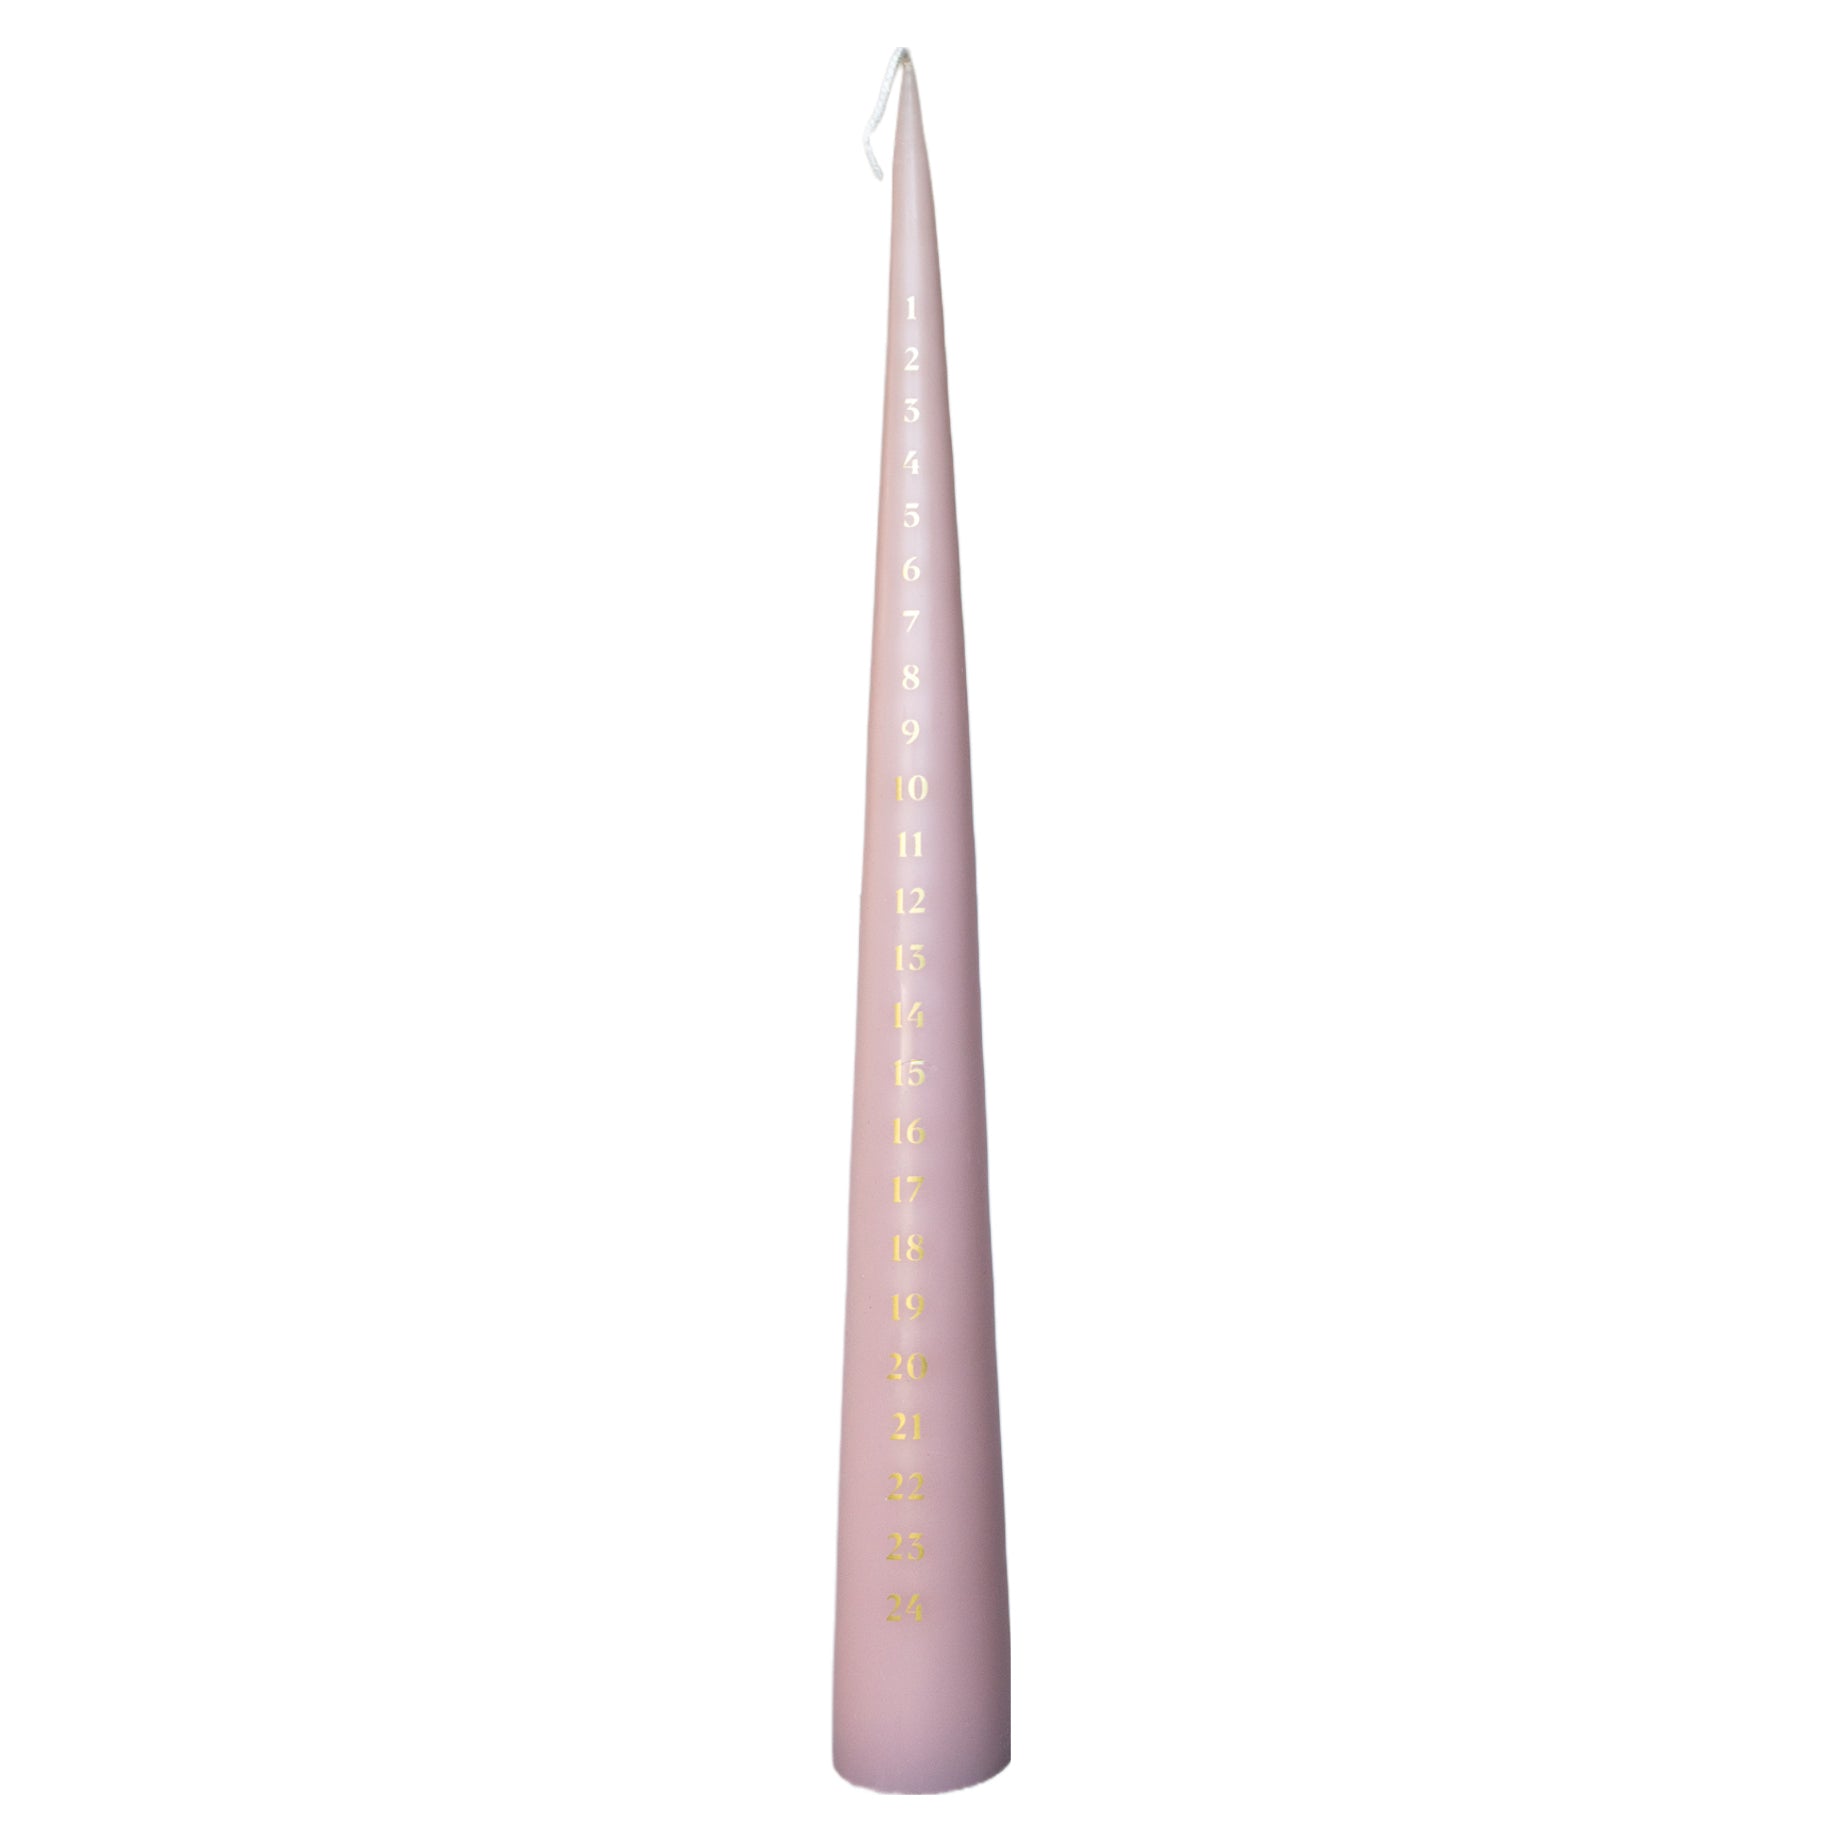 Cone Shaped Advent Candle in Old Rose